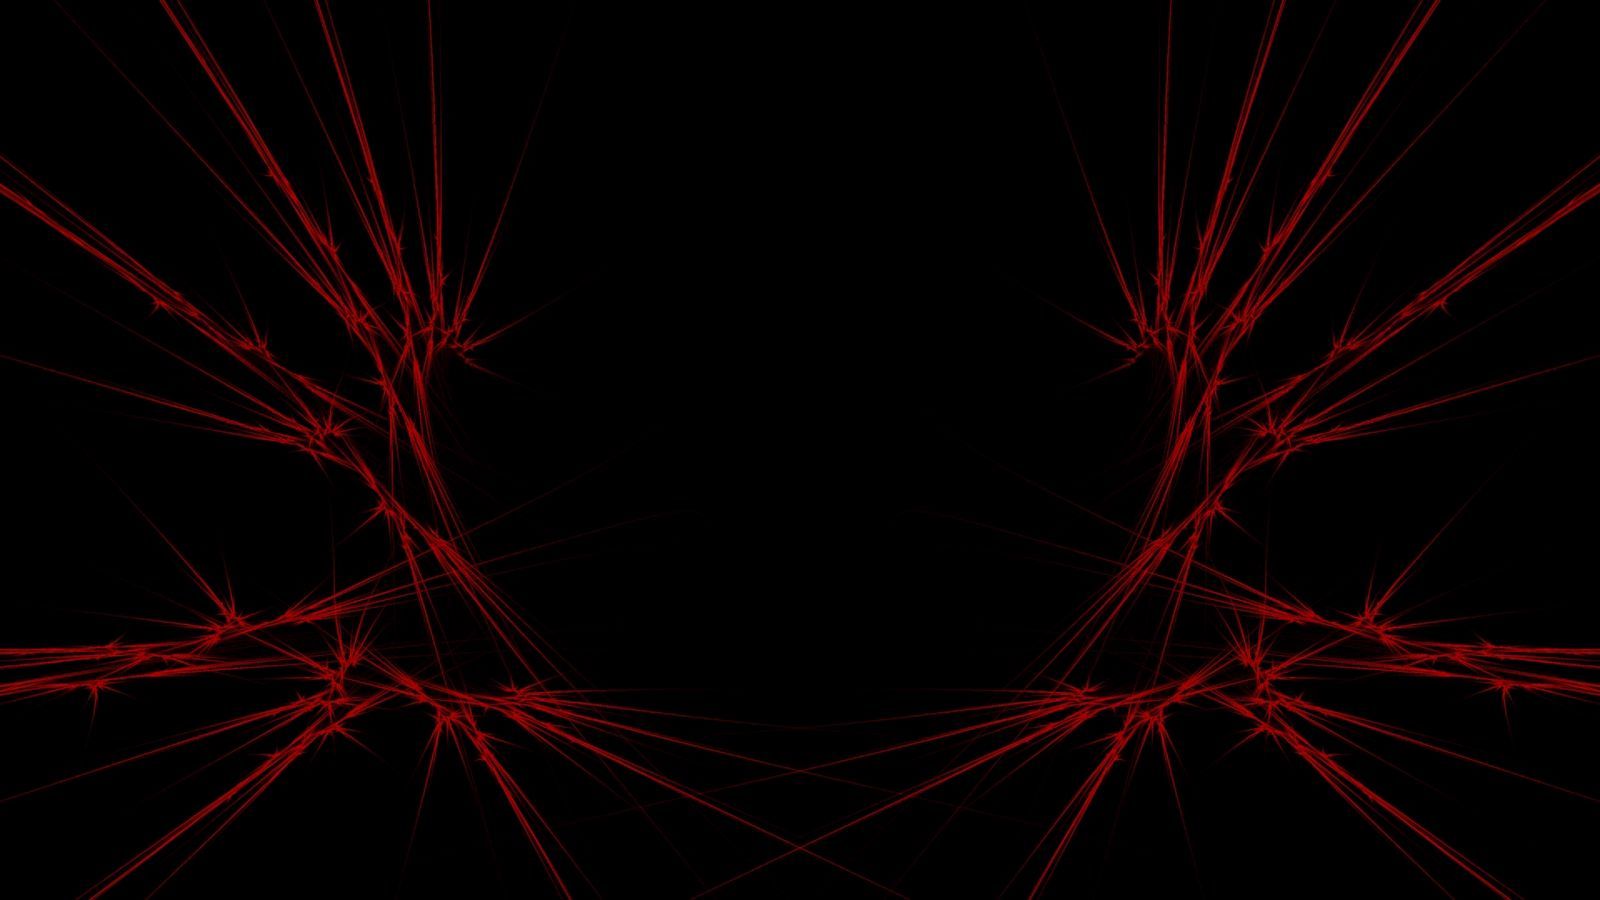 Download wallpaper 1600x900 red, black, abstract widescreen 16:9